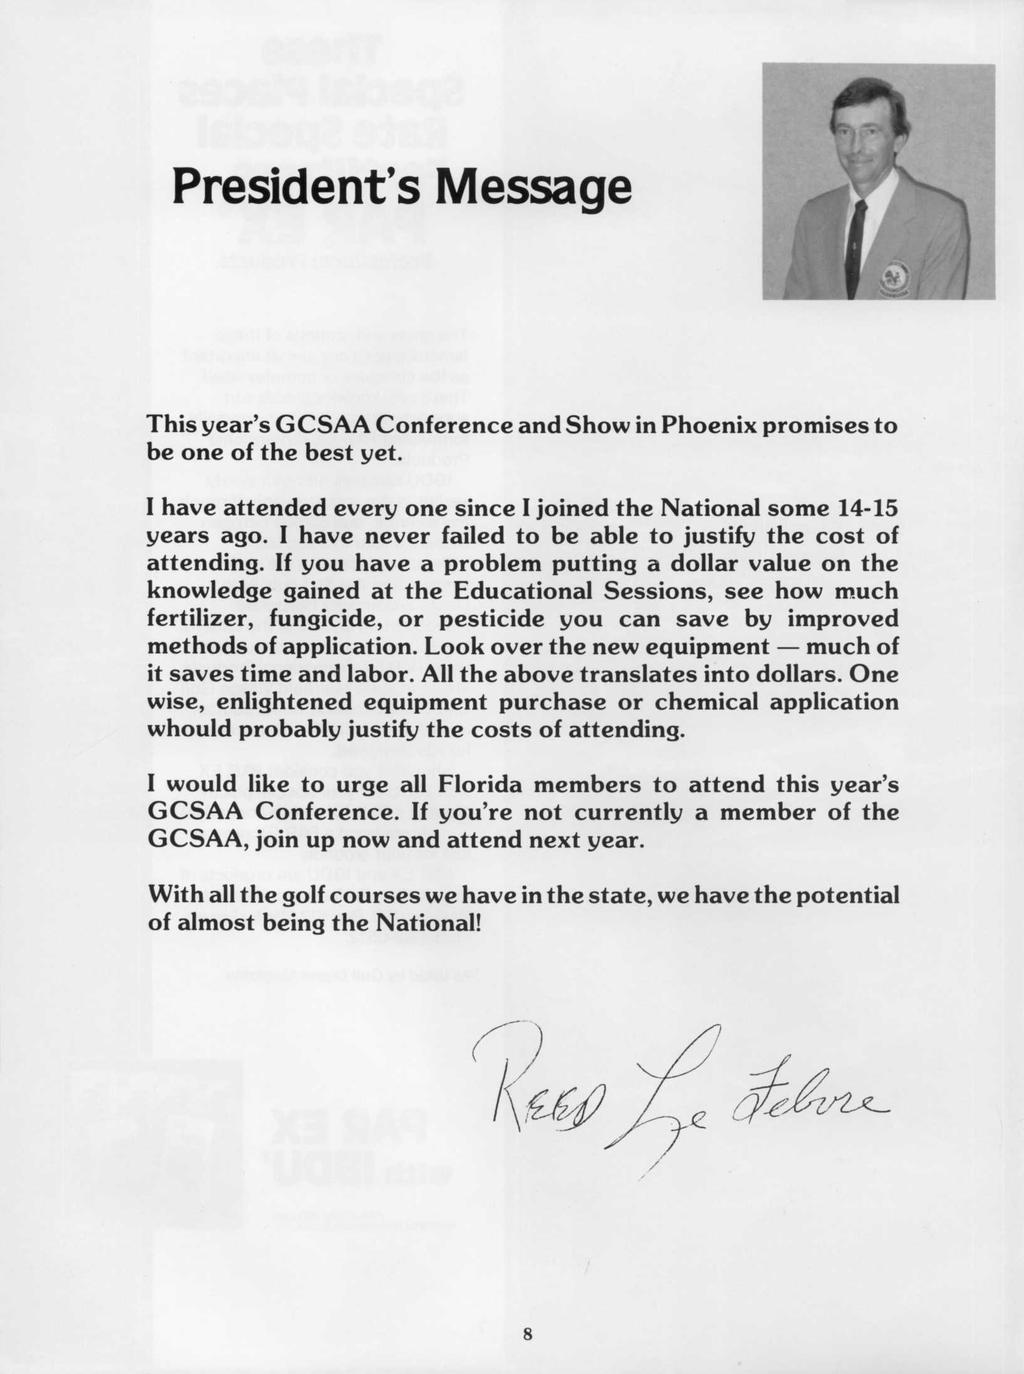 President's Message This year's GCSAA Conference and Show in Phoenix promises to be one of the best yet. I have attended every one since I joined the National some 14-15 years ago.